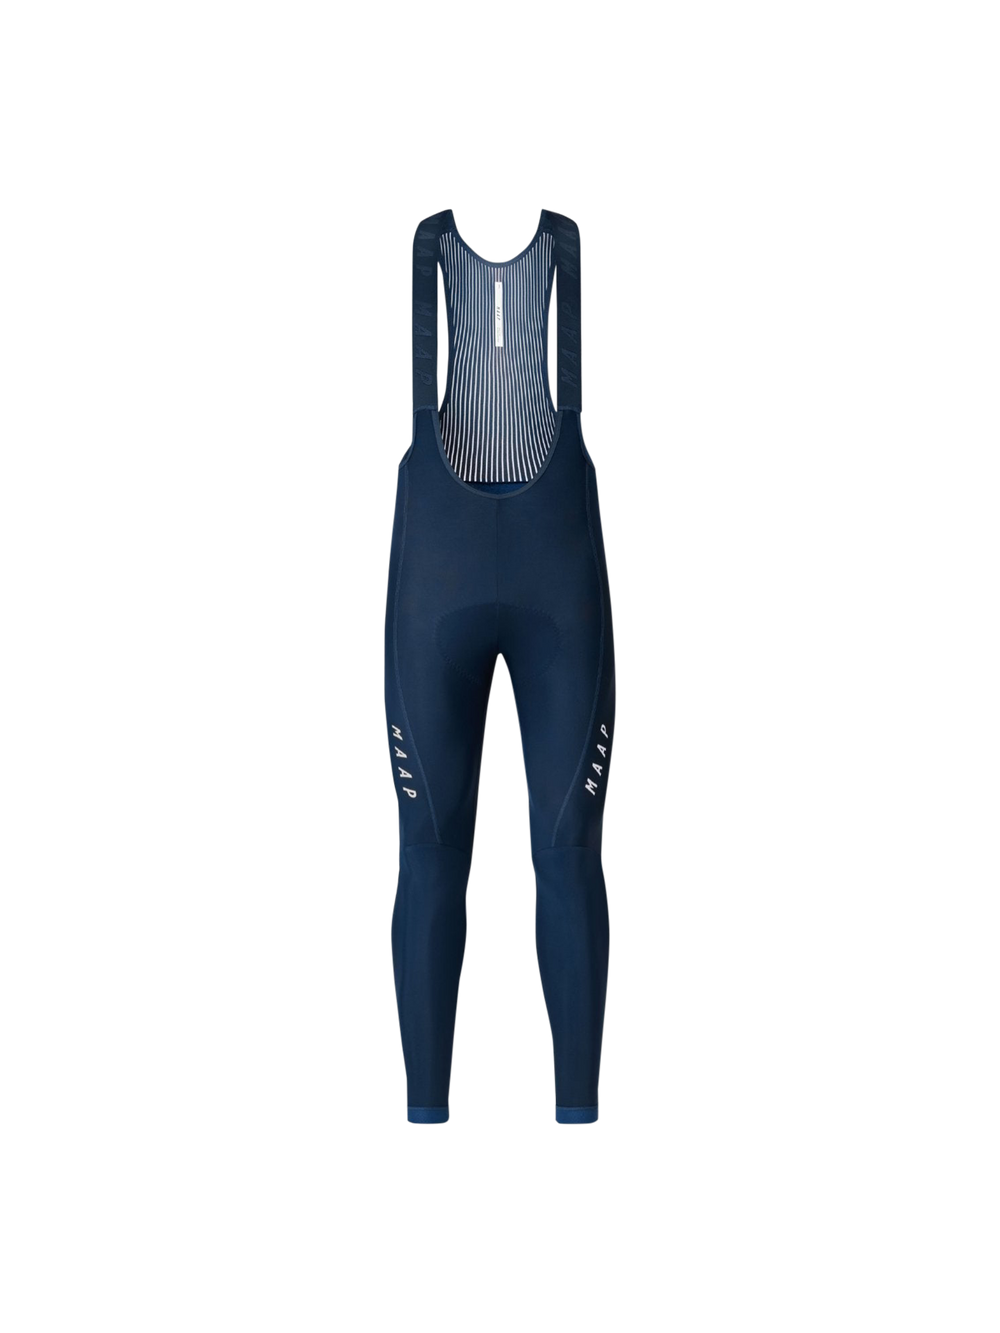 Product Image for Team Evo Thermal Bib Tight